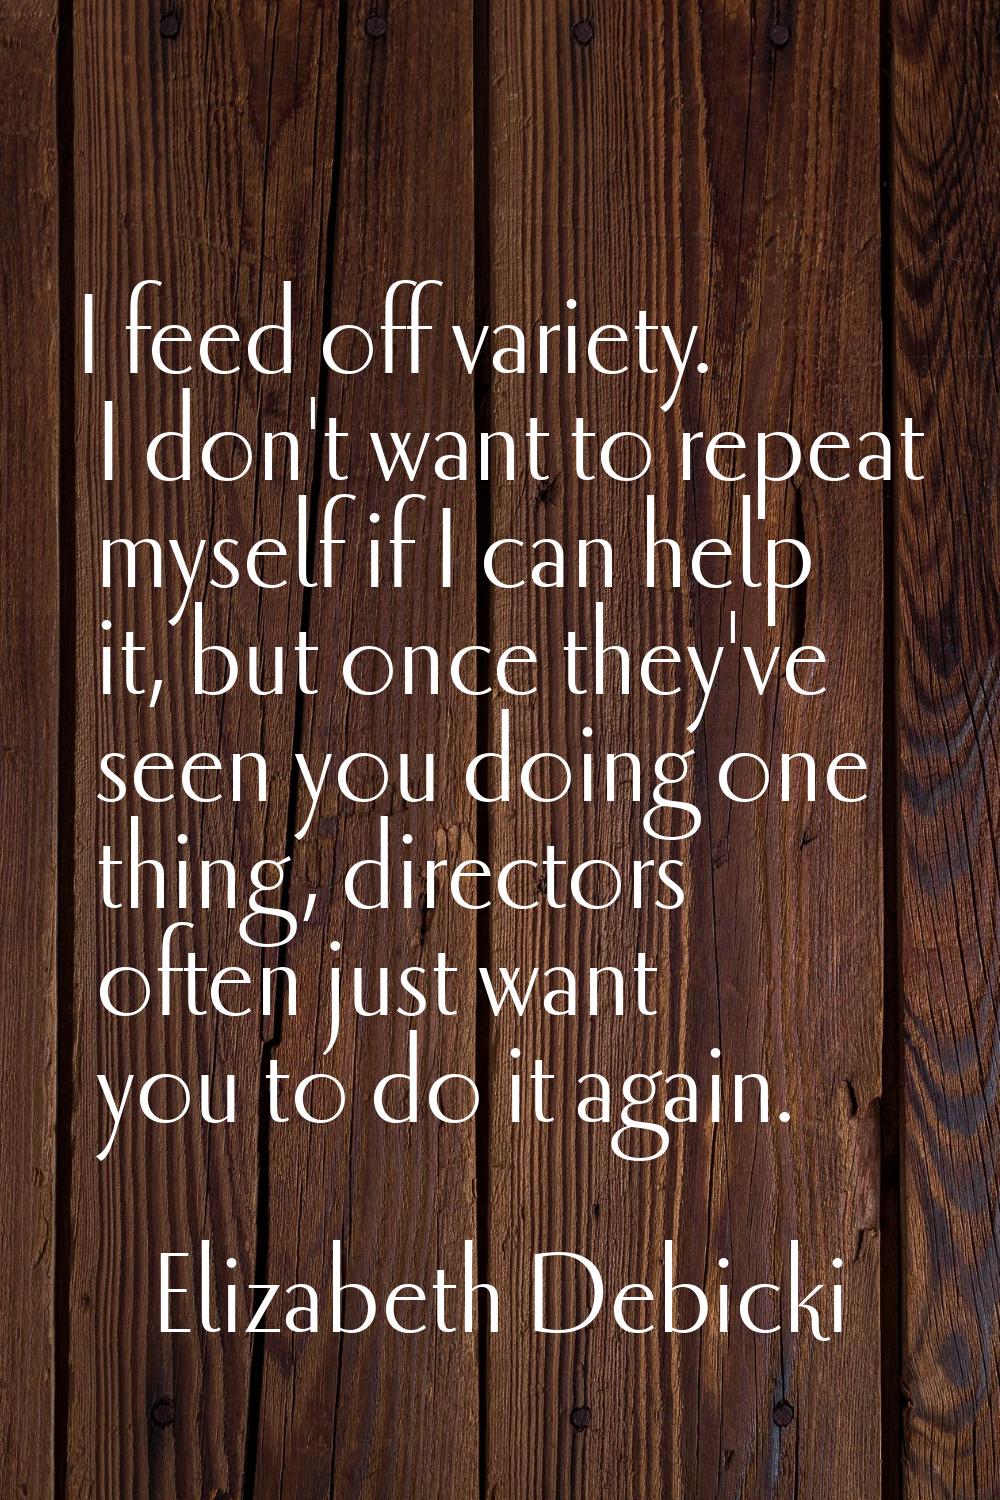 I feed off variety. I don't want to repeat myself if I can help it, but once they've seen you doing